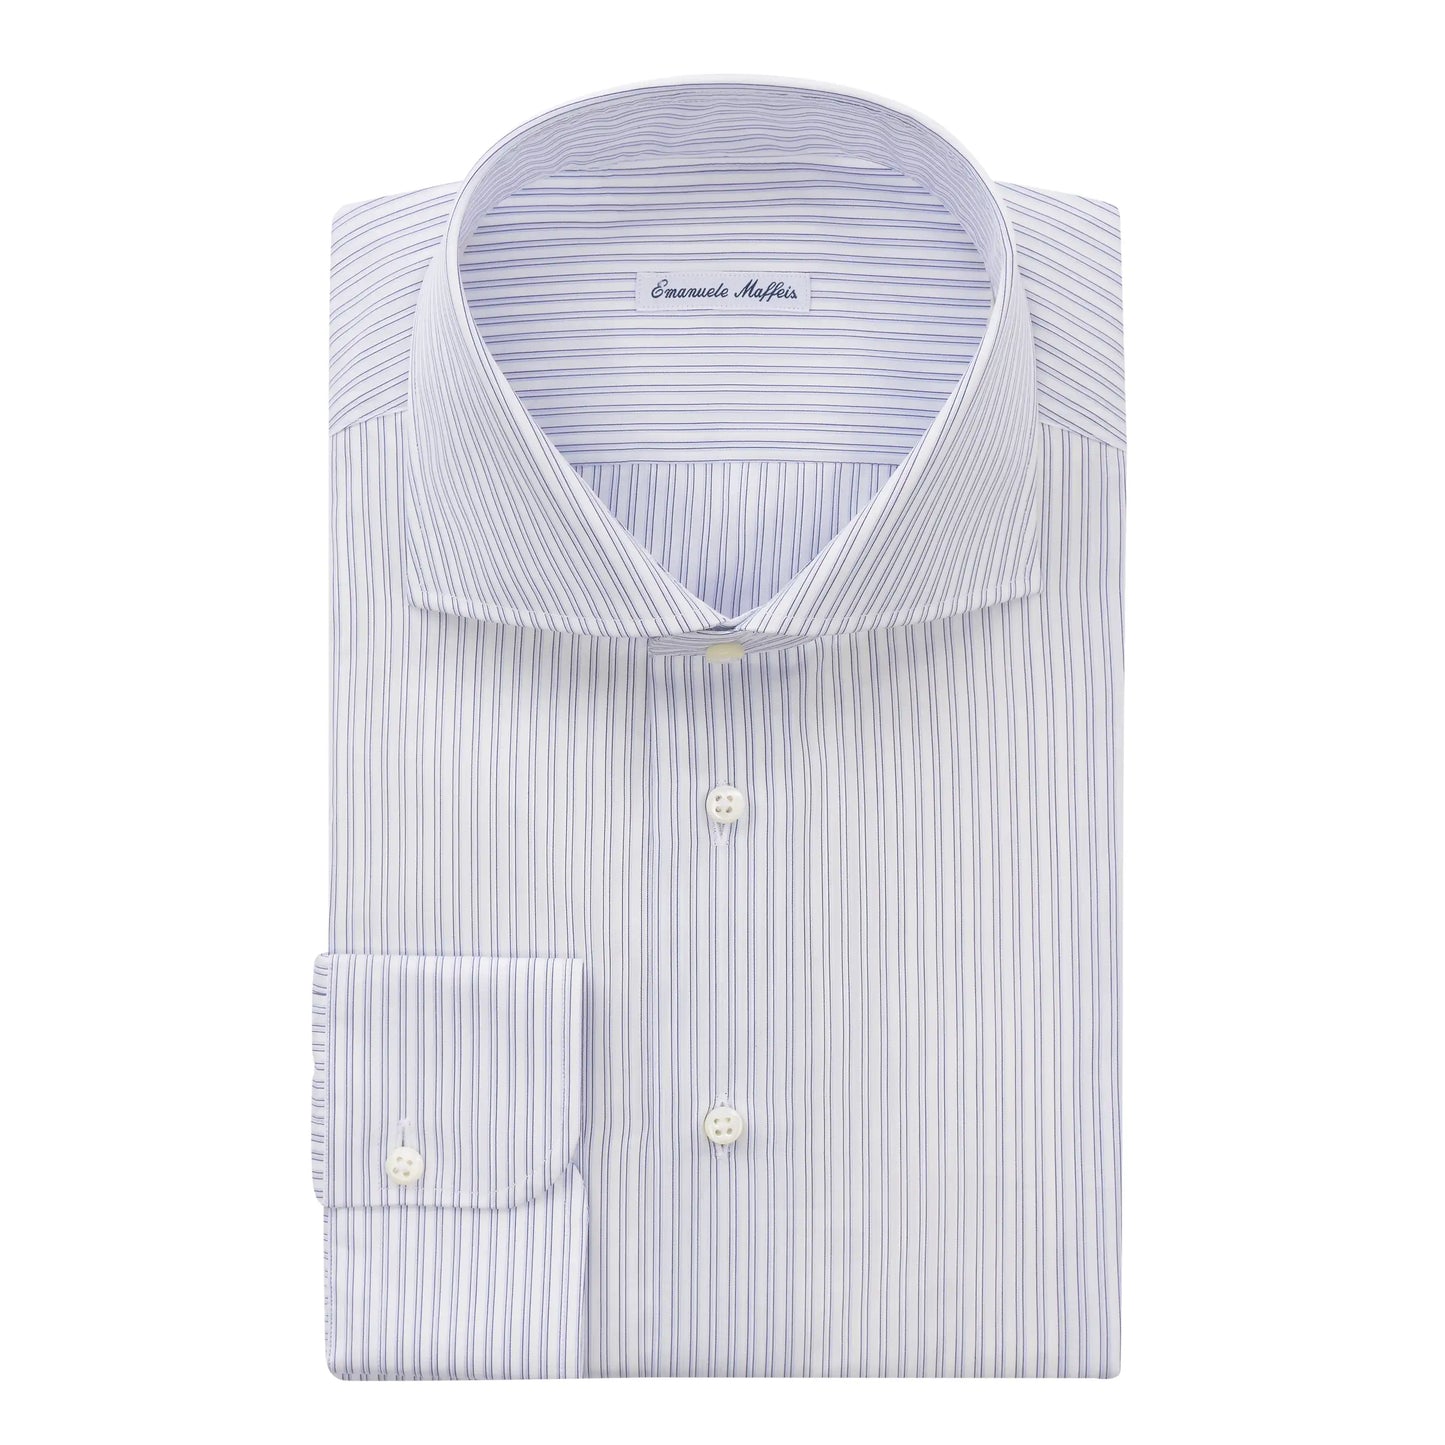 Finest Cotton Double-Stripe White and Blue Shirt with Cutaway Collar